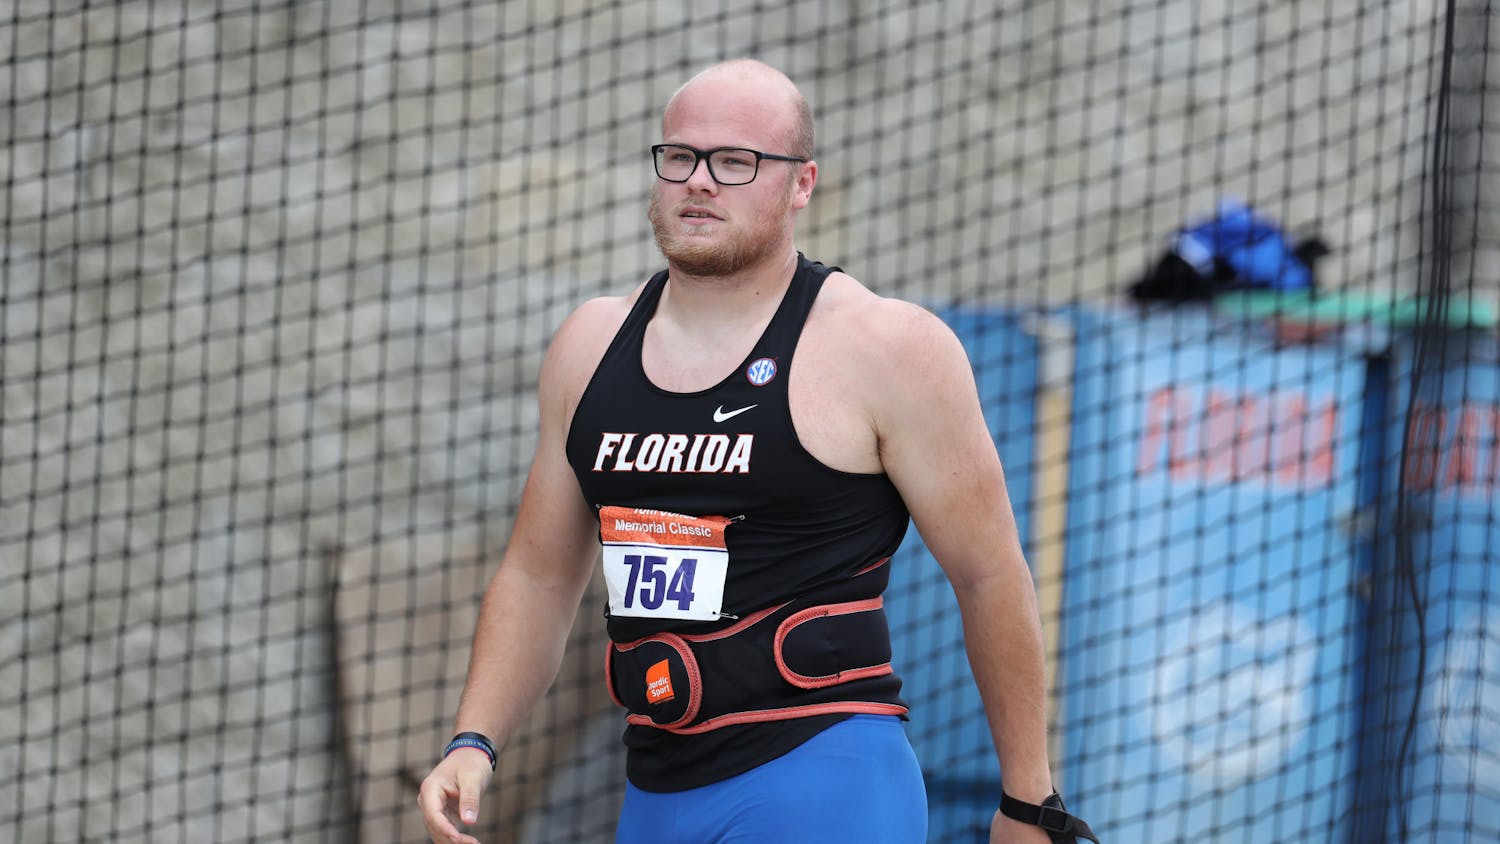 Florida's Thomas Mardal during the Tom Jones Invitational on Saturday, April 17, 2021 at Percy Beard Track at James G. Pressly Stadium in Gainesville, Fla. / UAA Communications photo by Isabella Marley